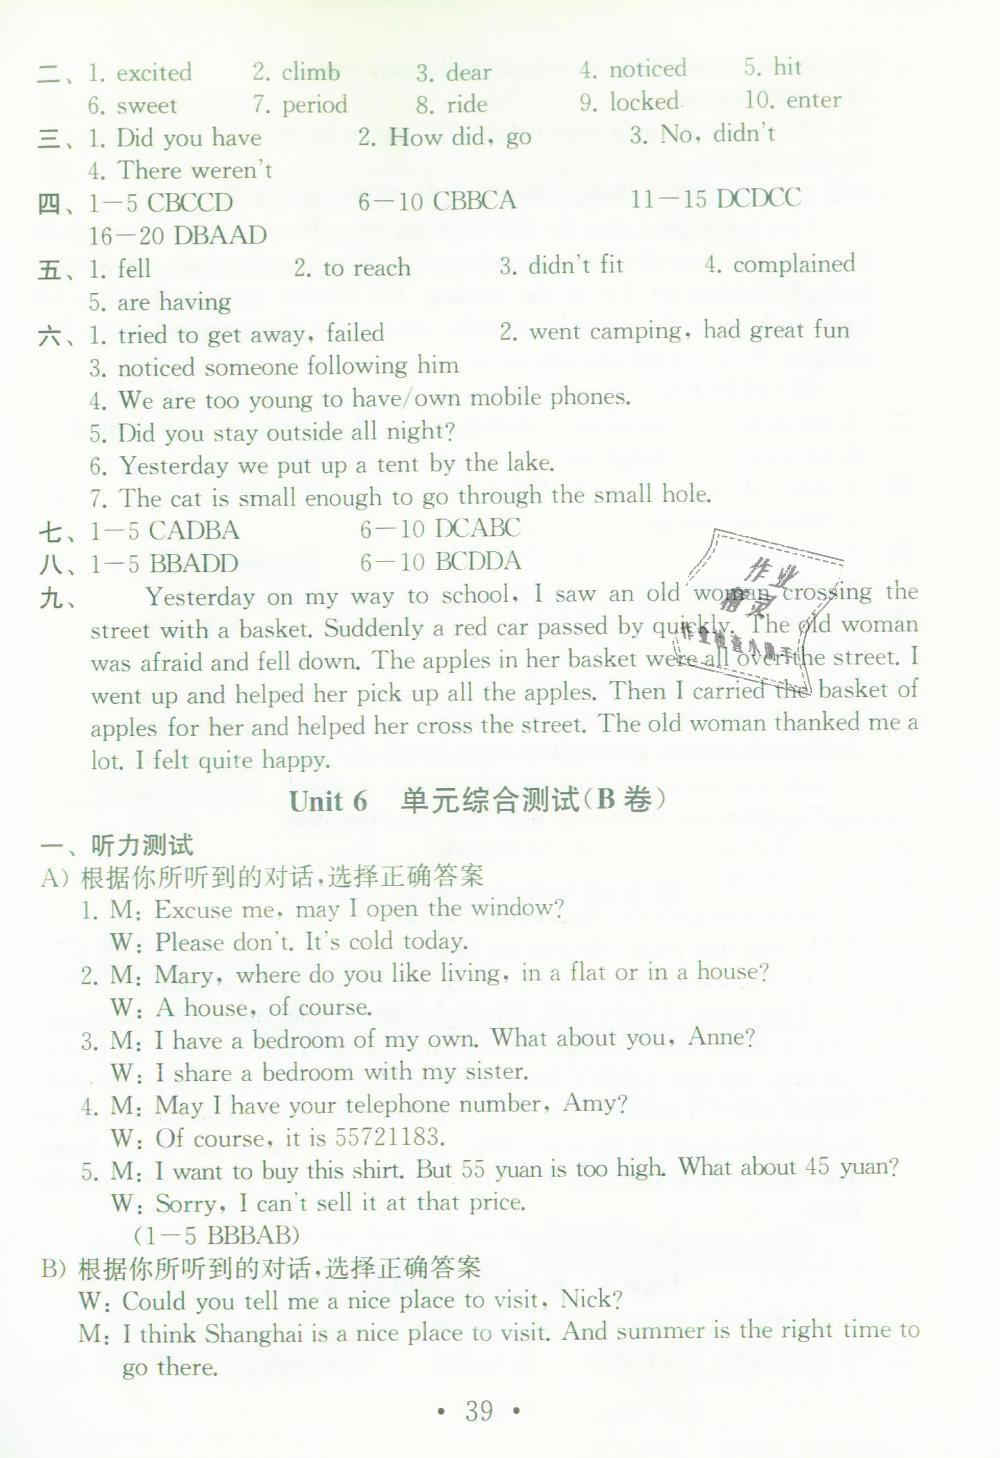 Test for Unit 6 of 7B B卷 - 第38页